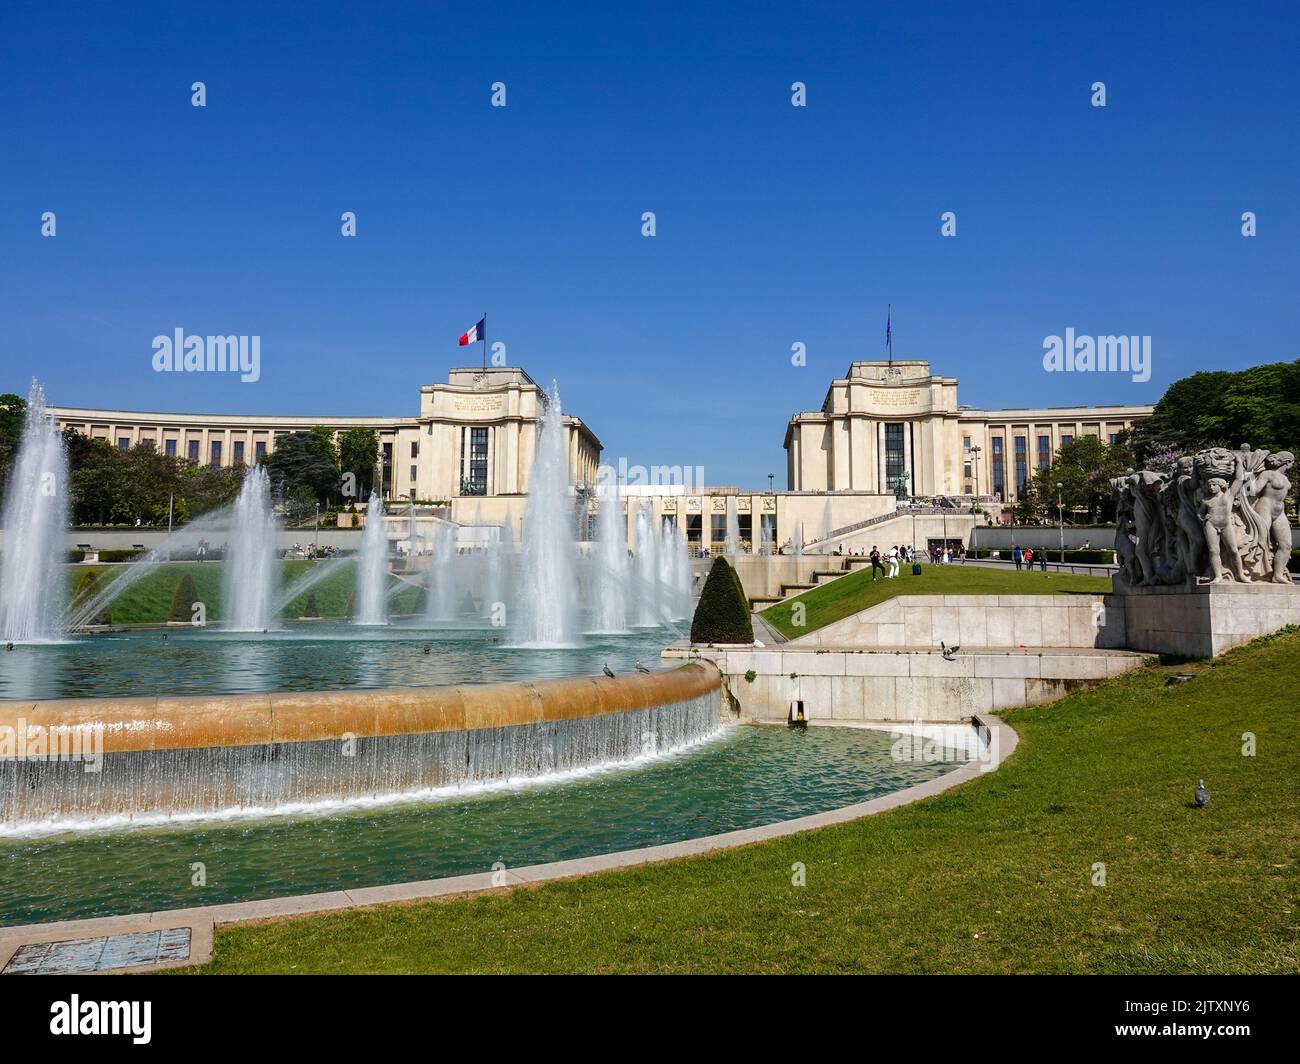 Fontaine du Jardin du Trocadéro, visitors at the Fountains at Trocadero on a bright, sunny day, Paris, France. Stock Photo